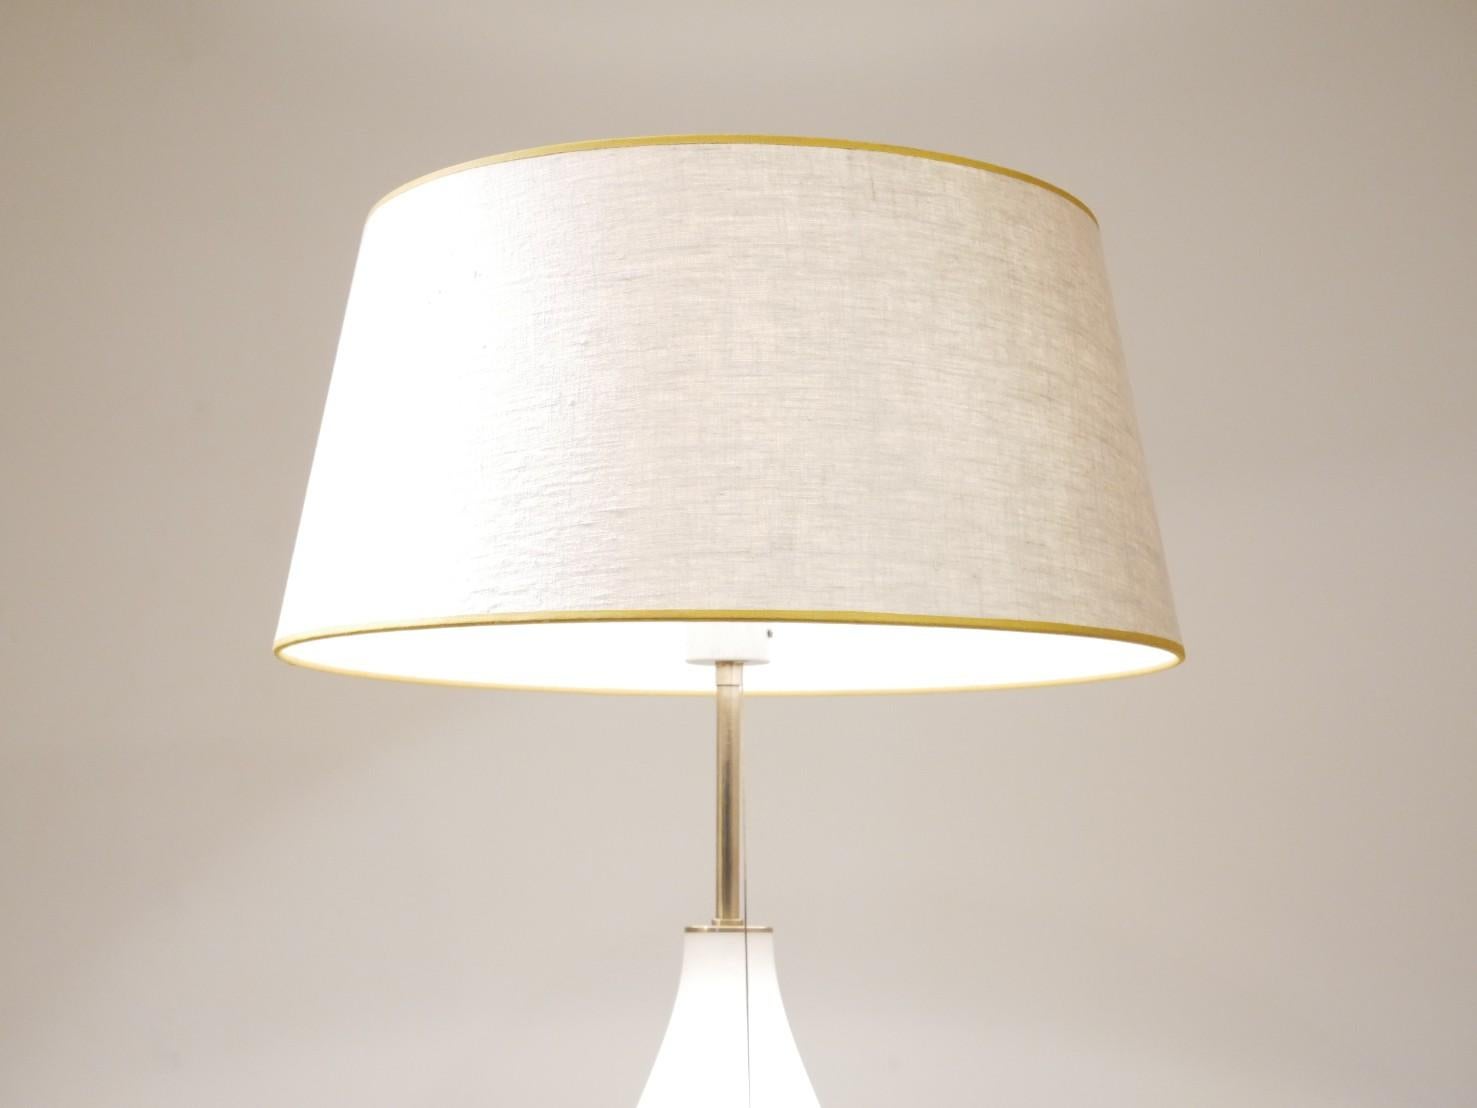 This large table lamp made with curved opalescent glass with a brass base and neck, was manufactured by the German company Peill & Putzler. The lamp shade is made in textile with an embroidered edge that matches the brass elements.